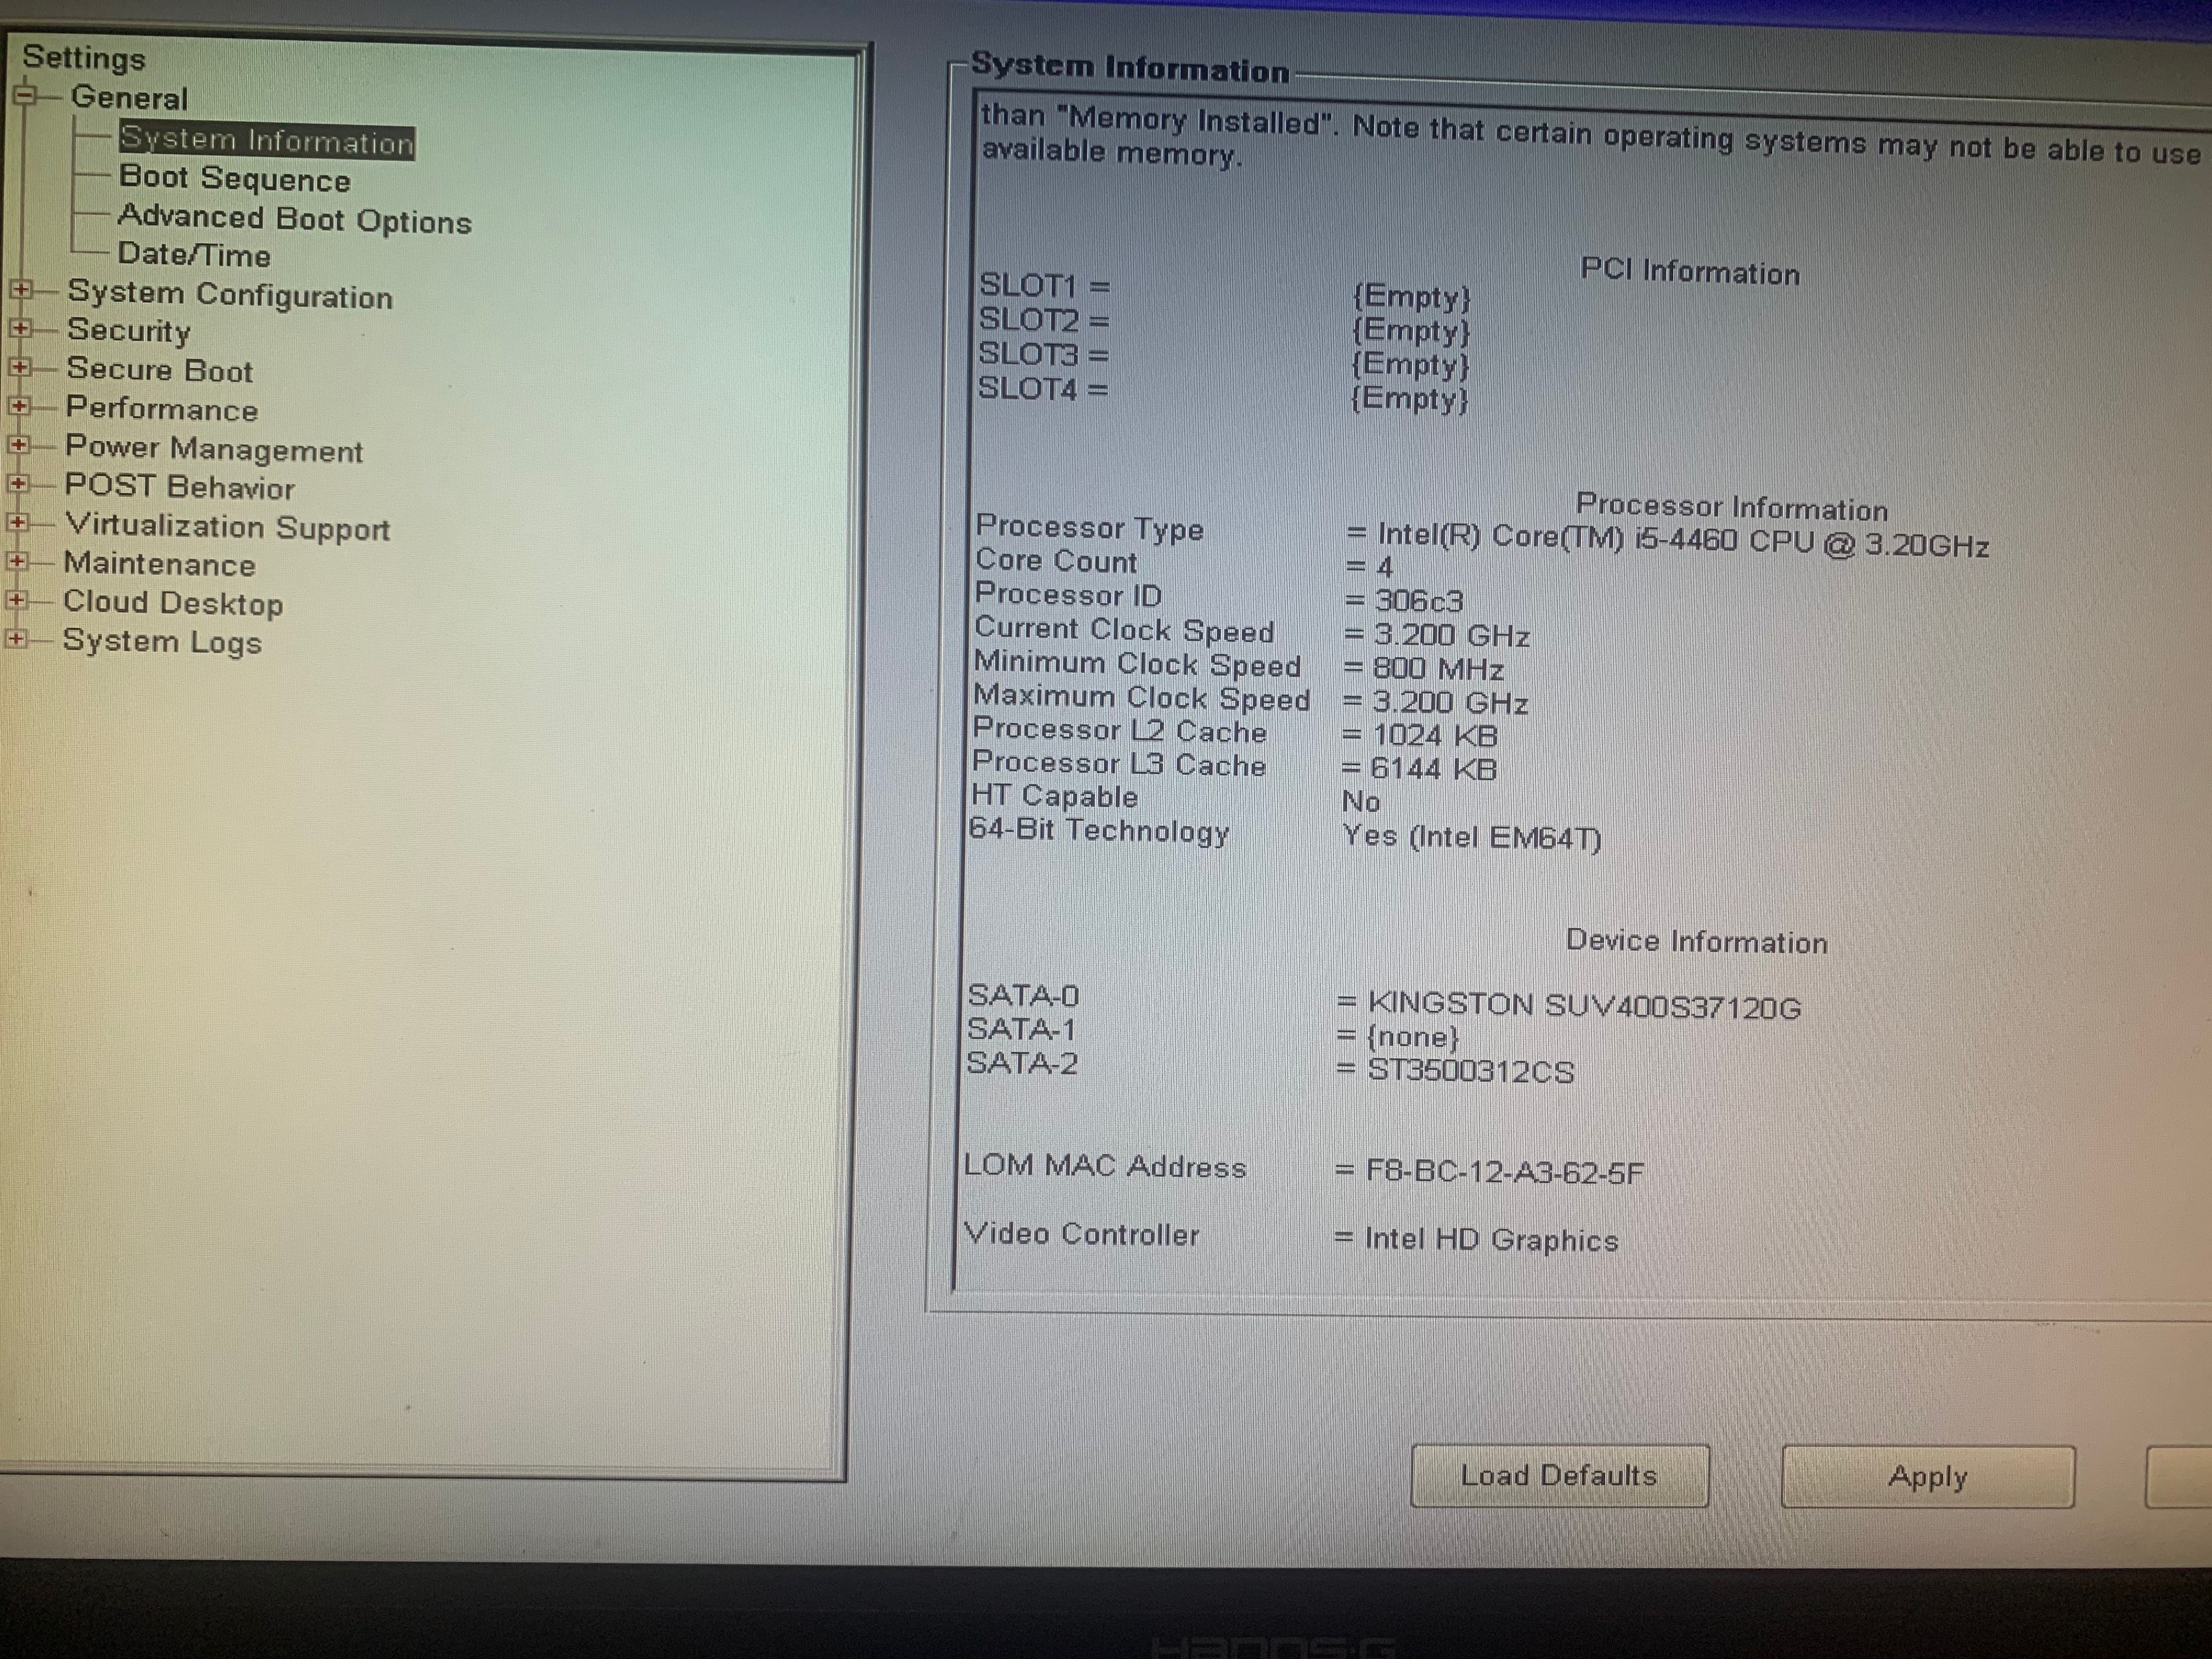 Checking the Device Information in BIOS